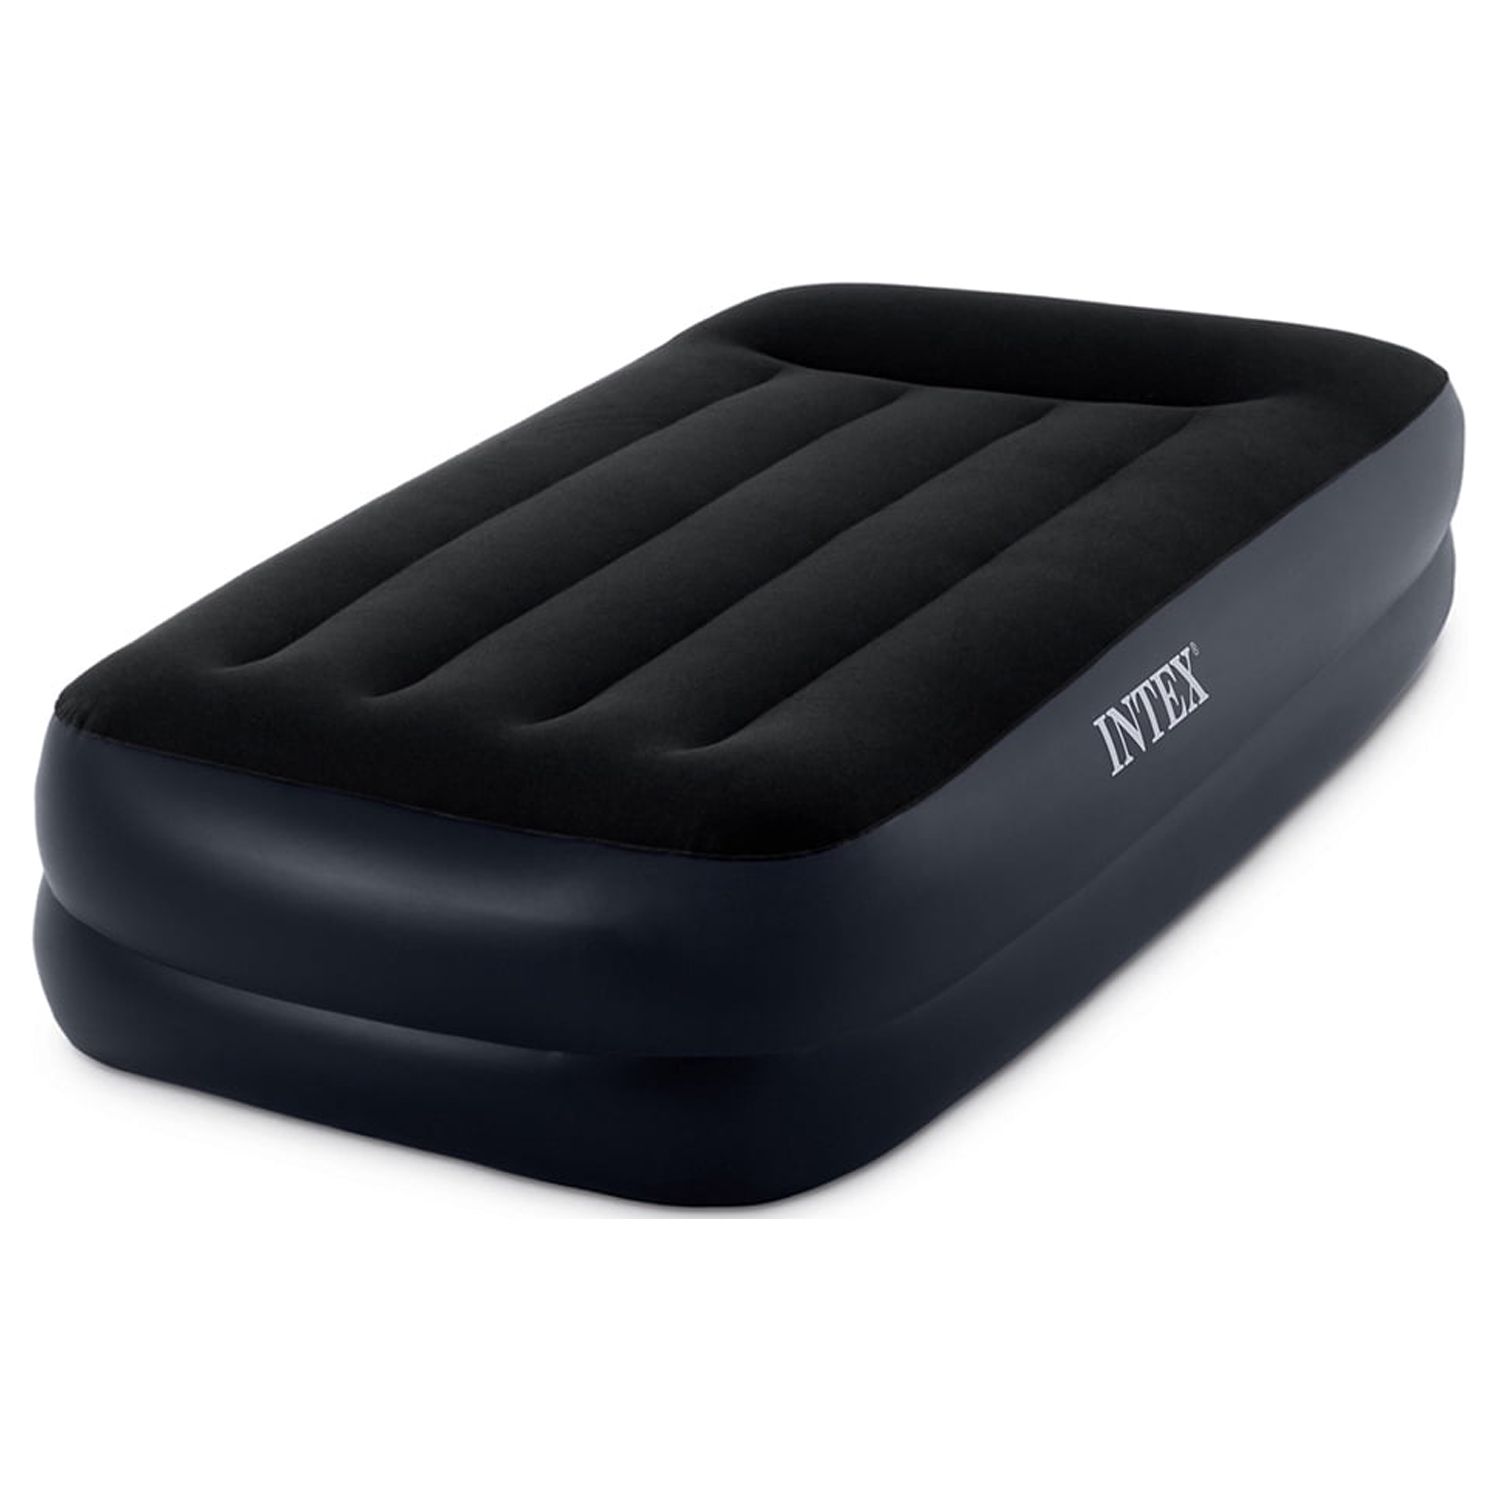 Intex Twin Rest Raised Air Mattress with Built In Pillow and Electric Pump, Gray - image 1 of 7